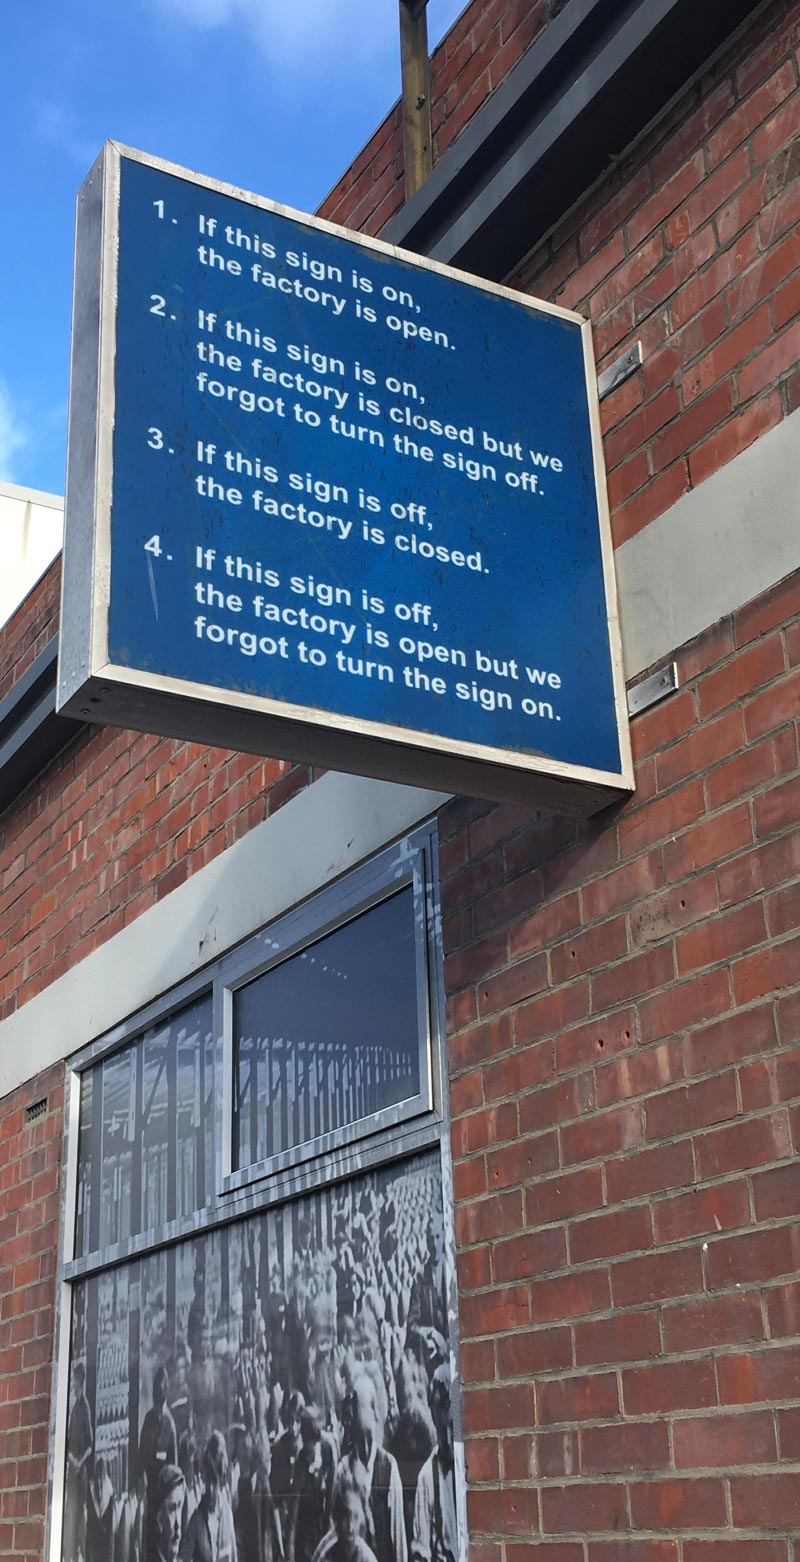 This factory sign in Christchurch